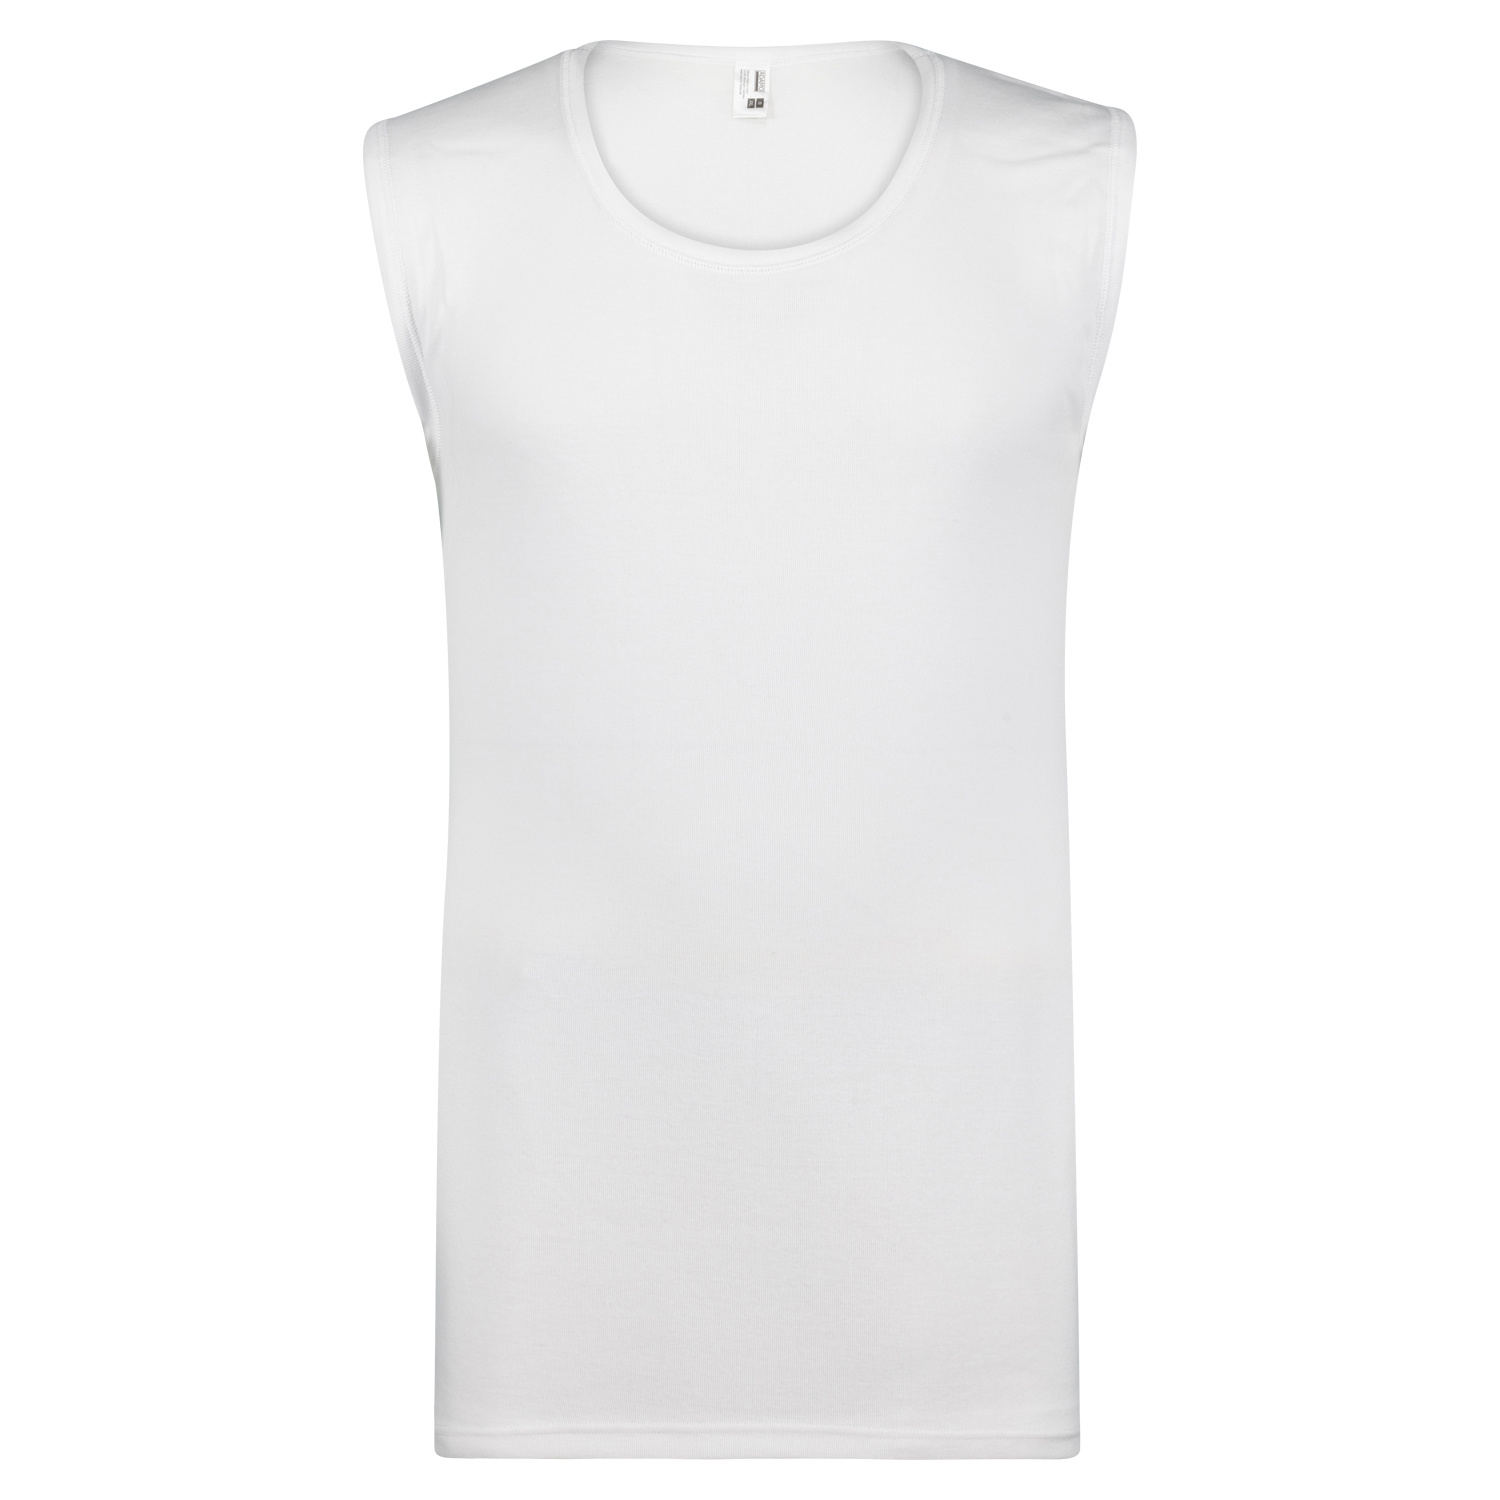 White city shirt without sleeve from ADAMO in plus sizes up to 20